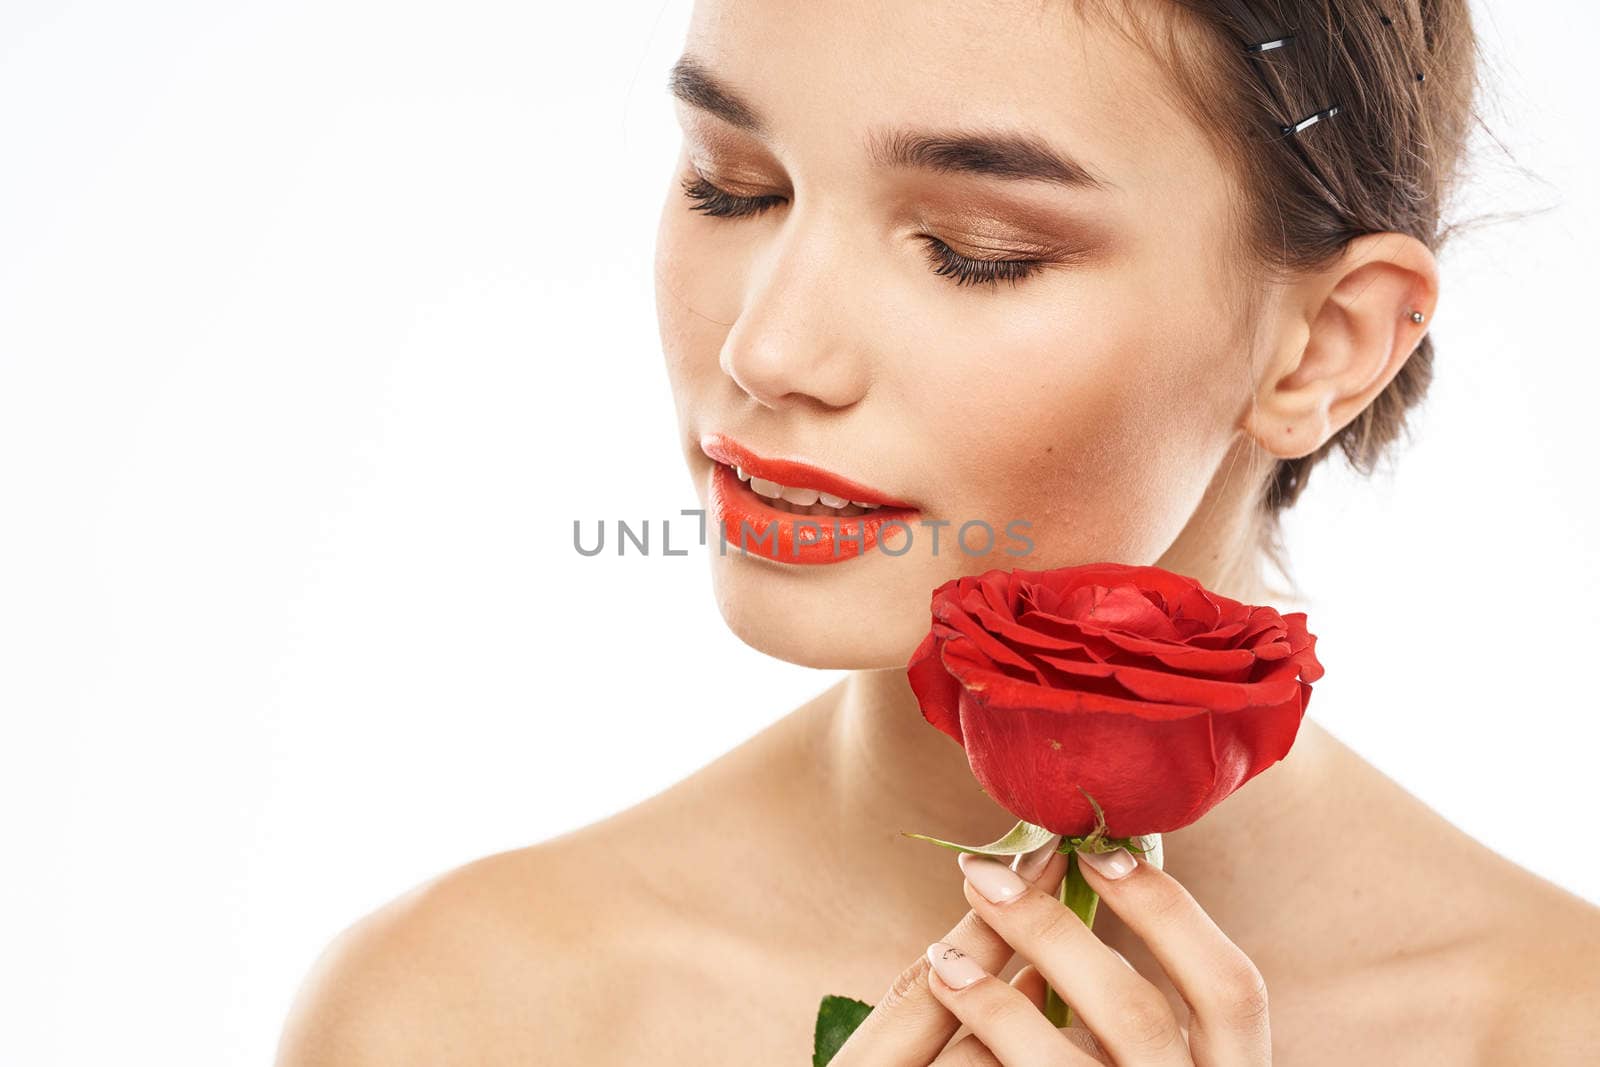 Beautiful woman with red rose near face makeup naked shoulders portrait. High quality photo